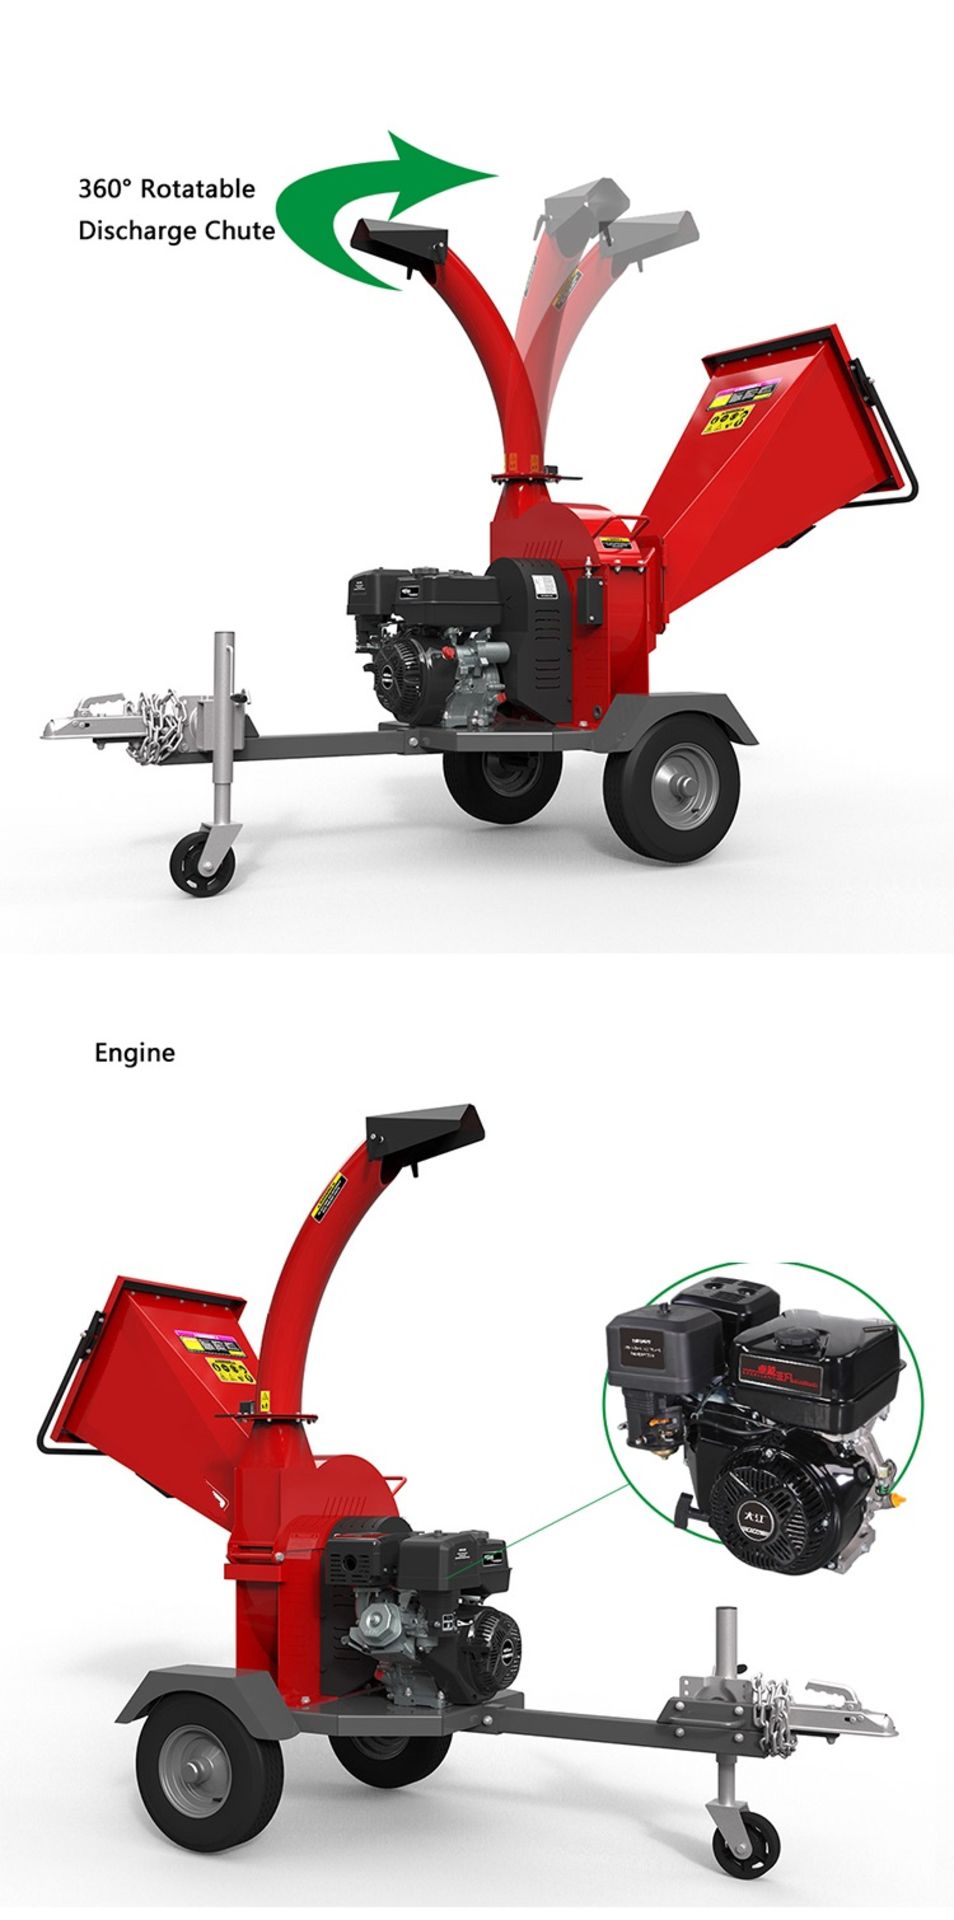 420cc Wood Chipper - BRAND NEW, comes with LED Rear light pack and numberplate holder *PLUS VAT* - Image 7 of 10